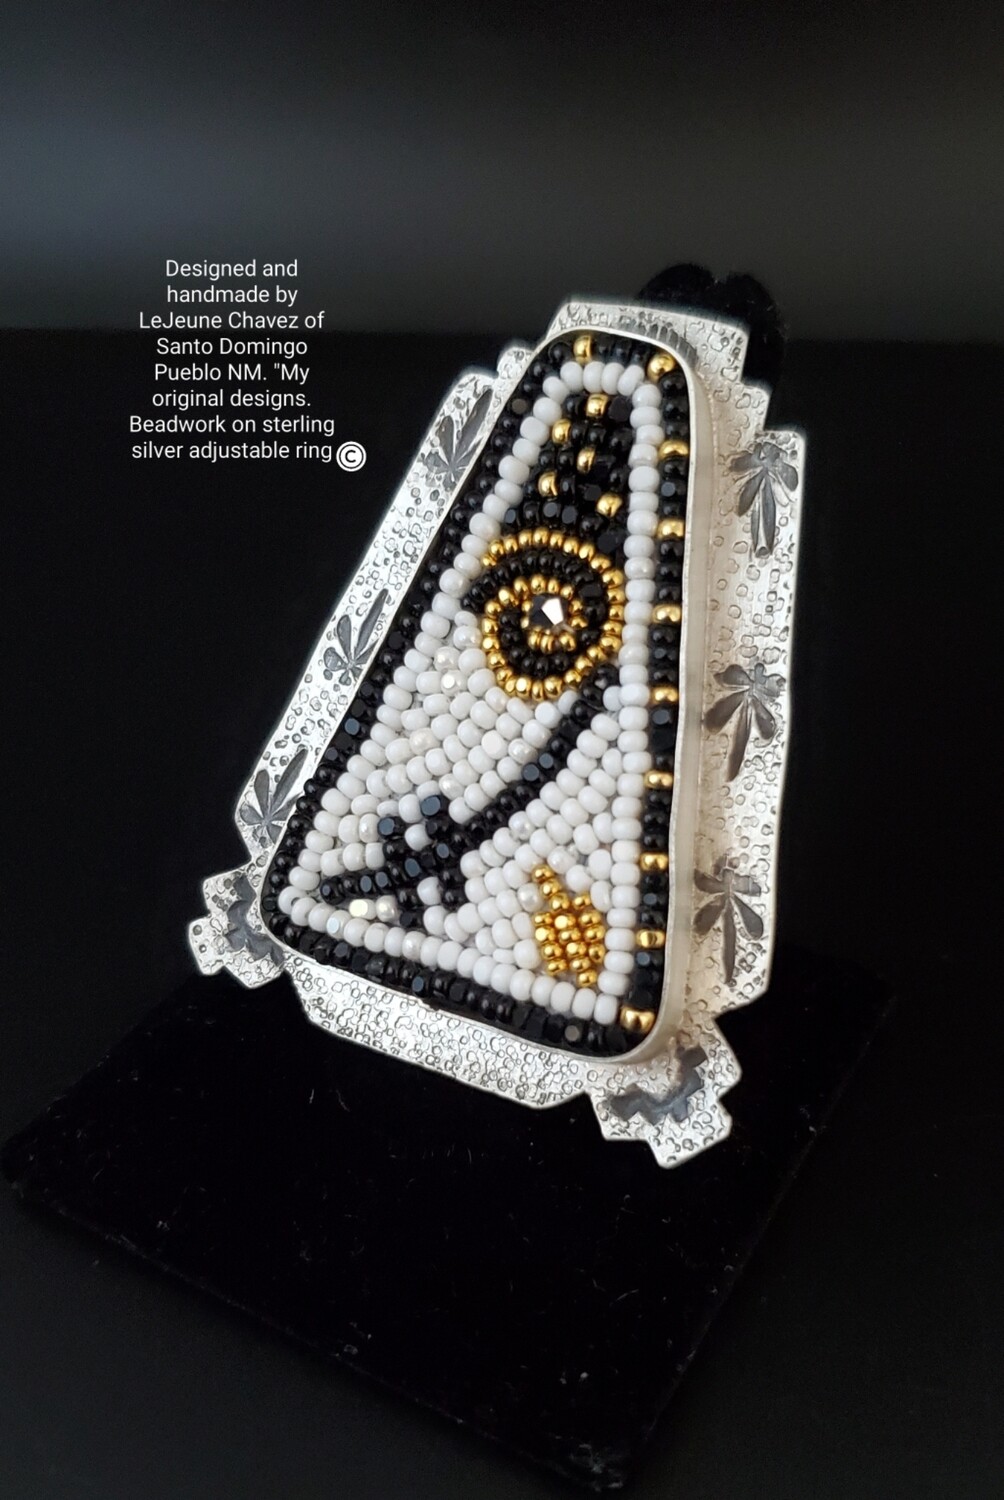 "SIGNATURE PIECE" Beadwork on sterling silver adjustable ring